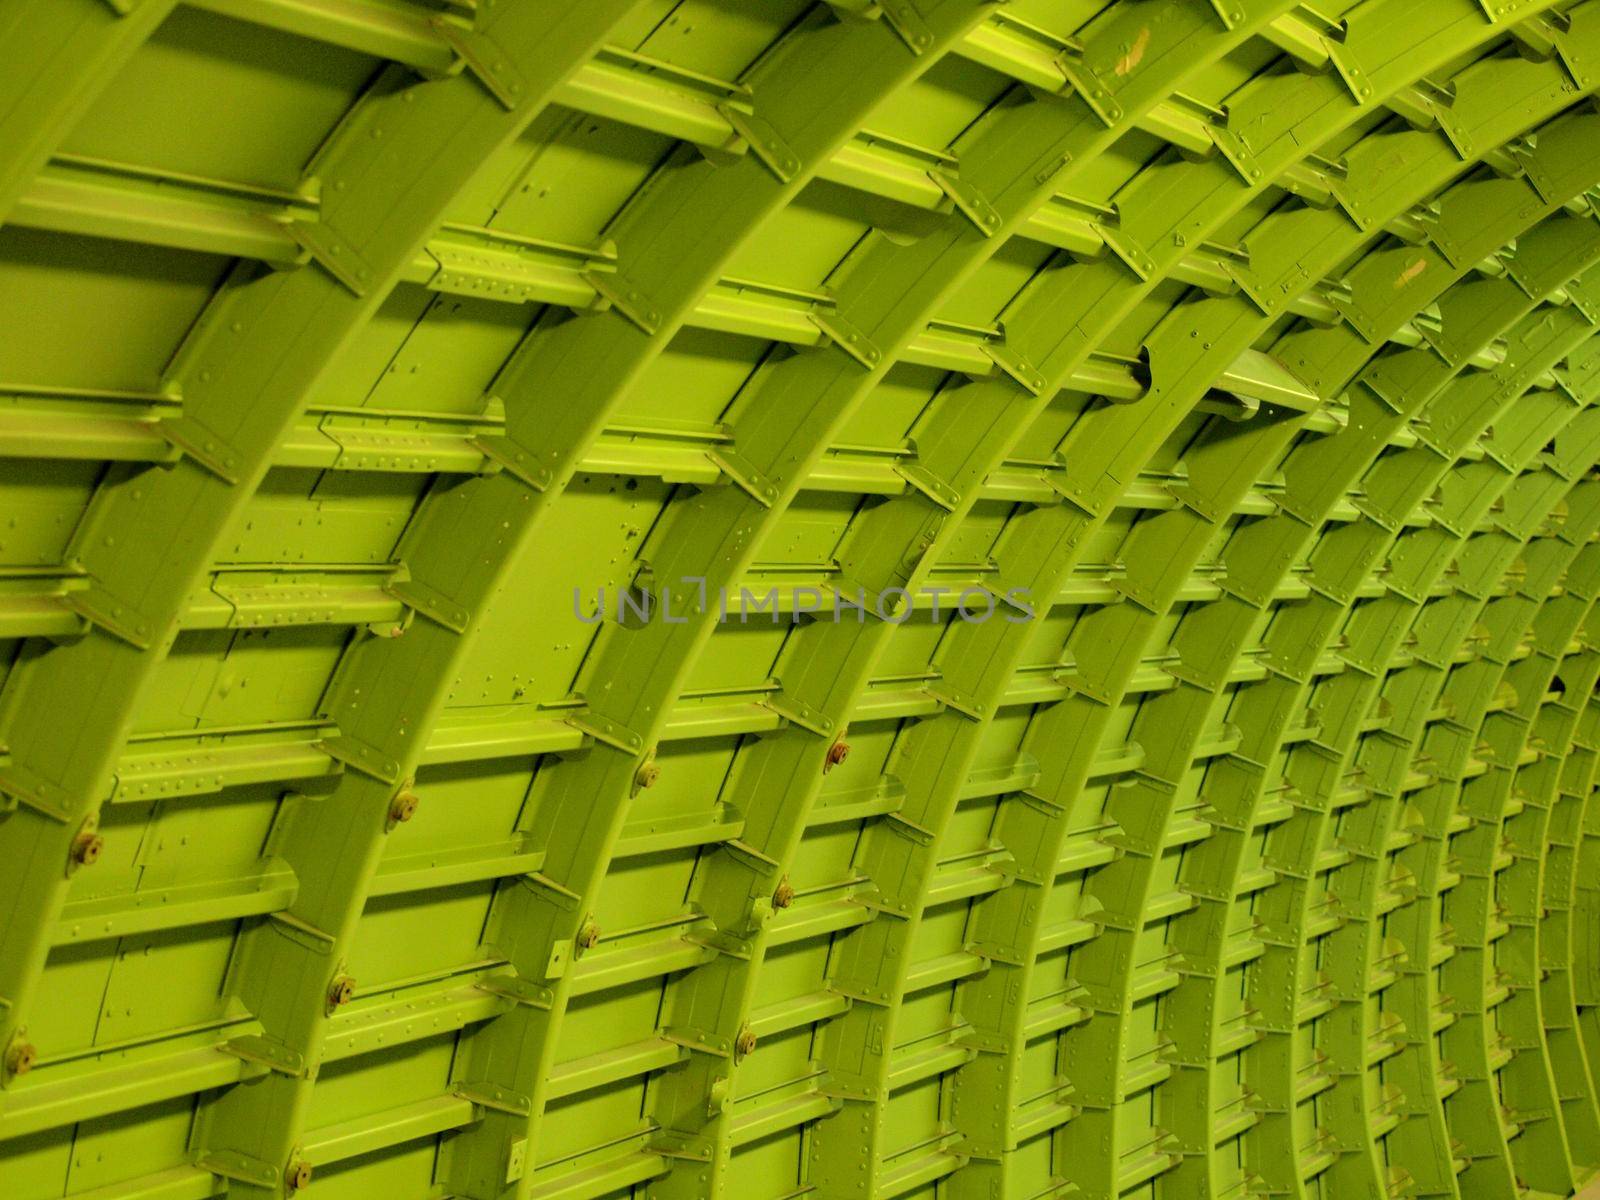 Green Curved Metal Plane interior by EricGBVD